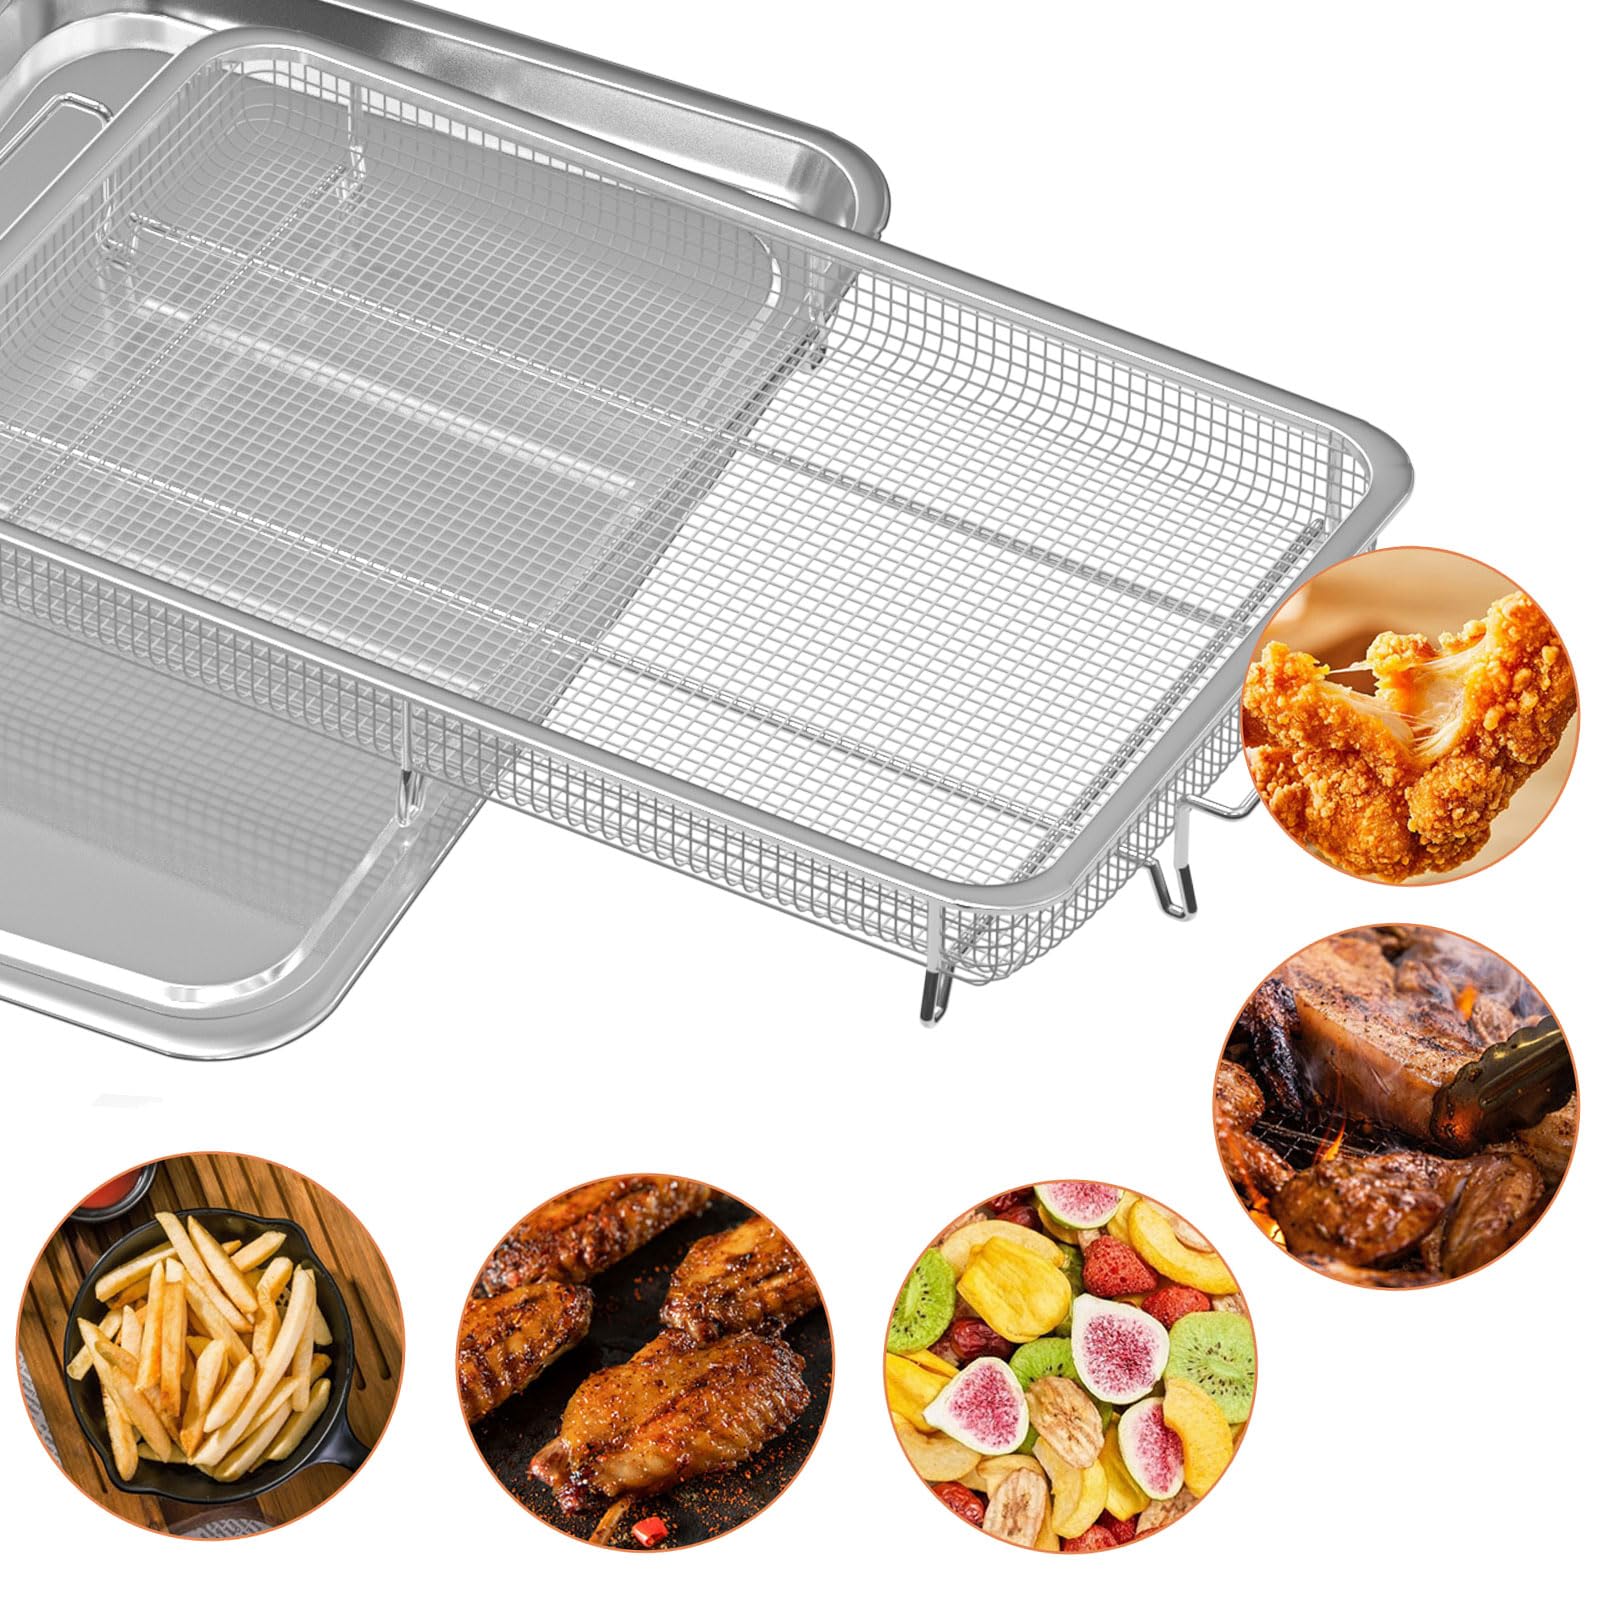 Extra Large Air Fryer Basket and Tray for Oven, 18.8'' x 13.3'' Stainless Steel Crisper Tray and Basket Set, Non-stick Mesh Basket Set, Air Fryer Tray Roasting Basket for Fries/Bacon/Chicken